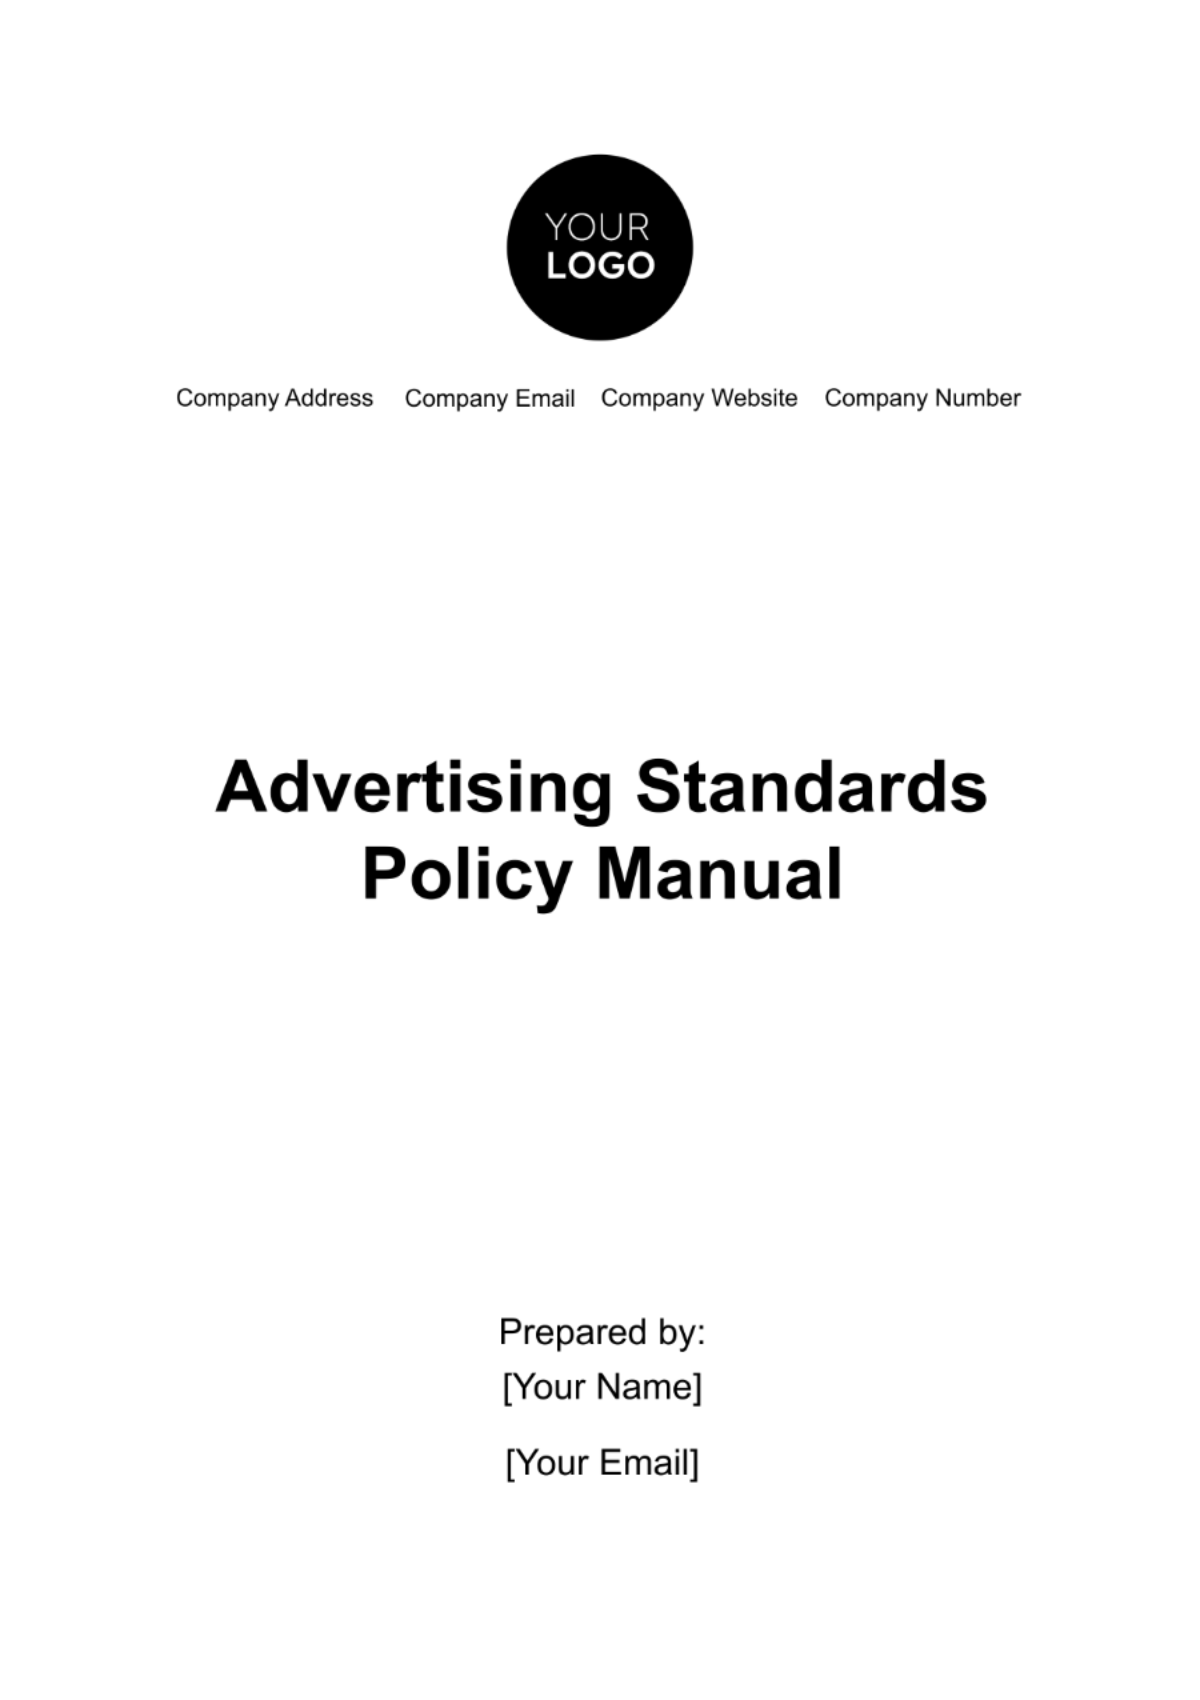 Advertising Standards Policy Manual Template